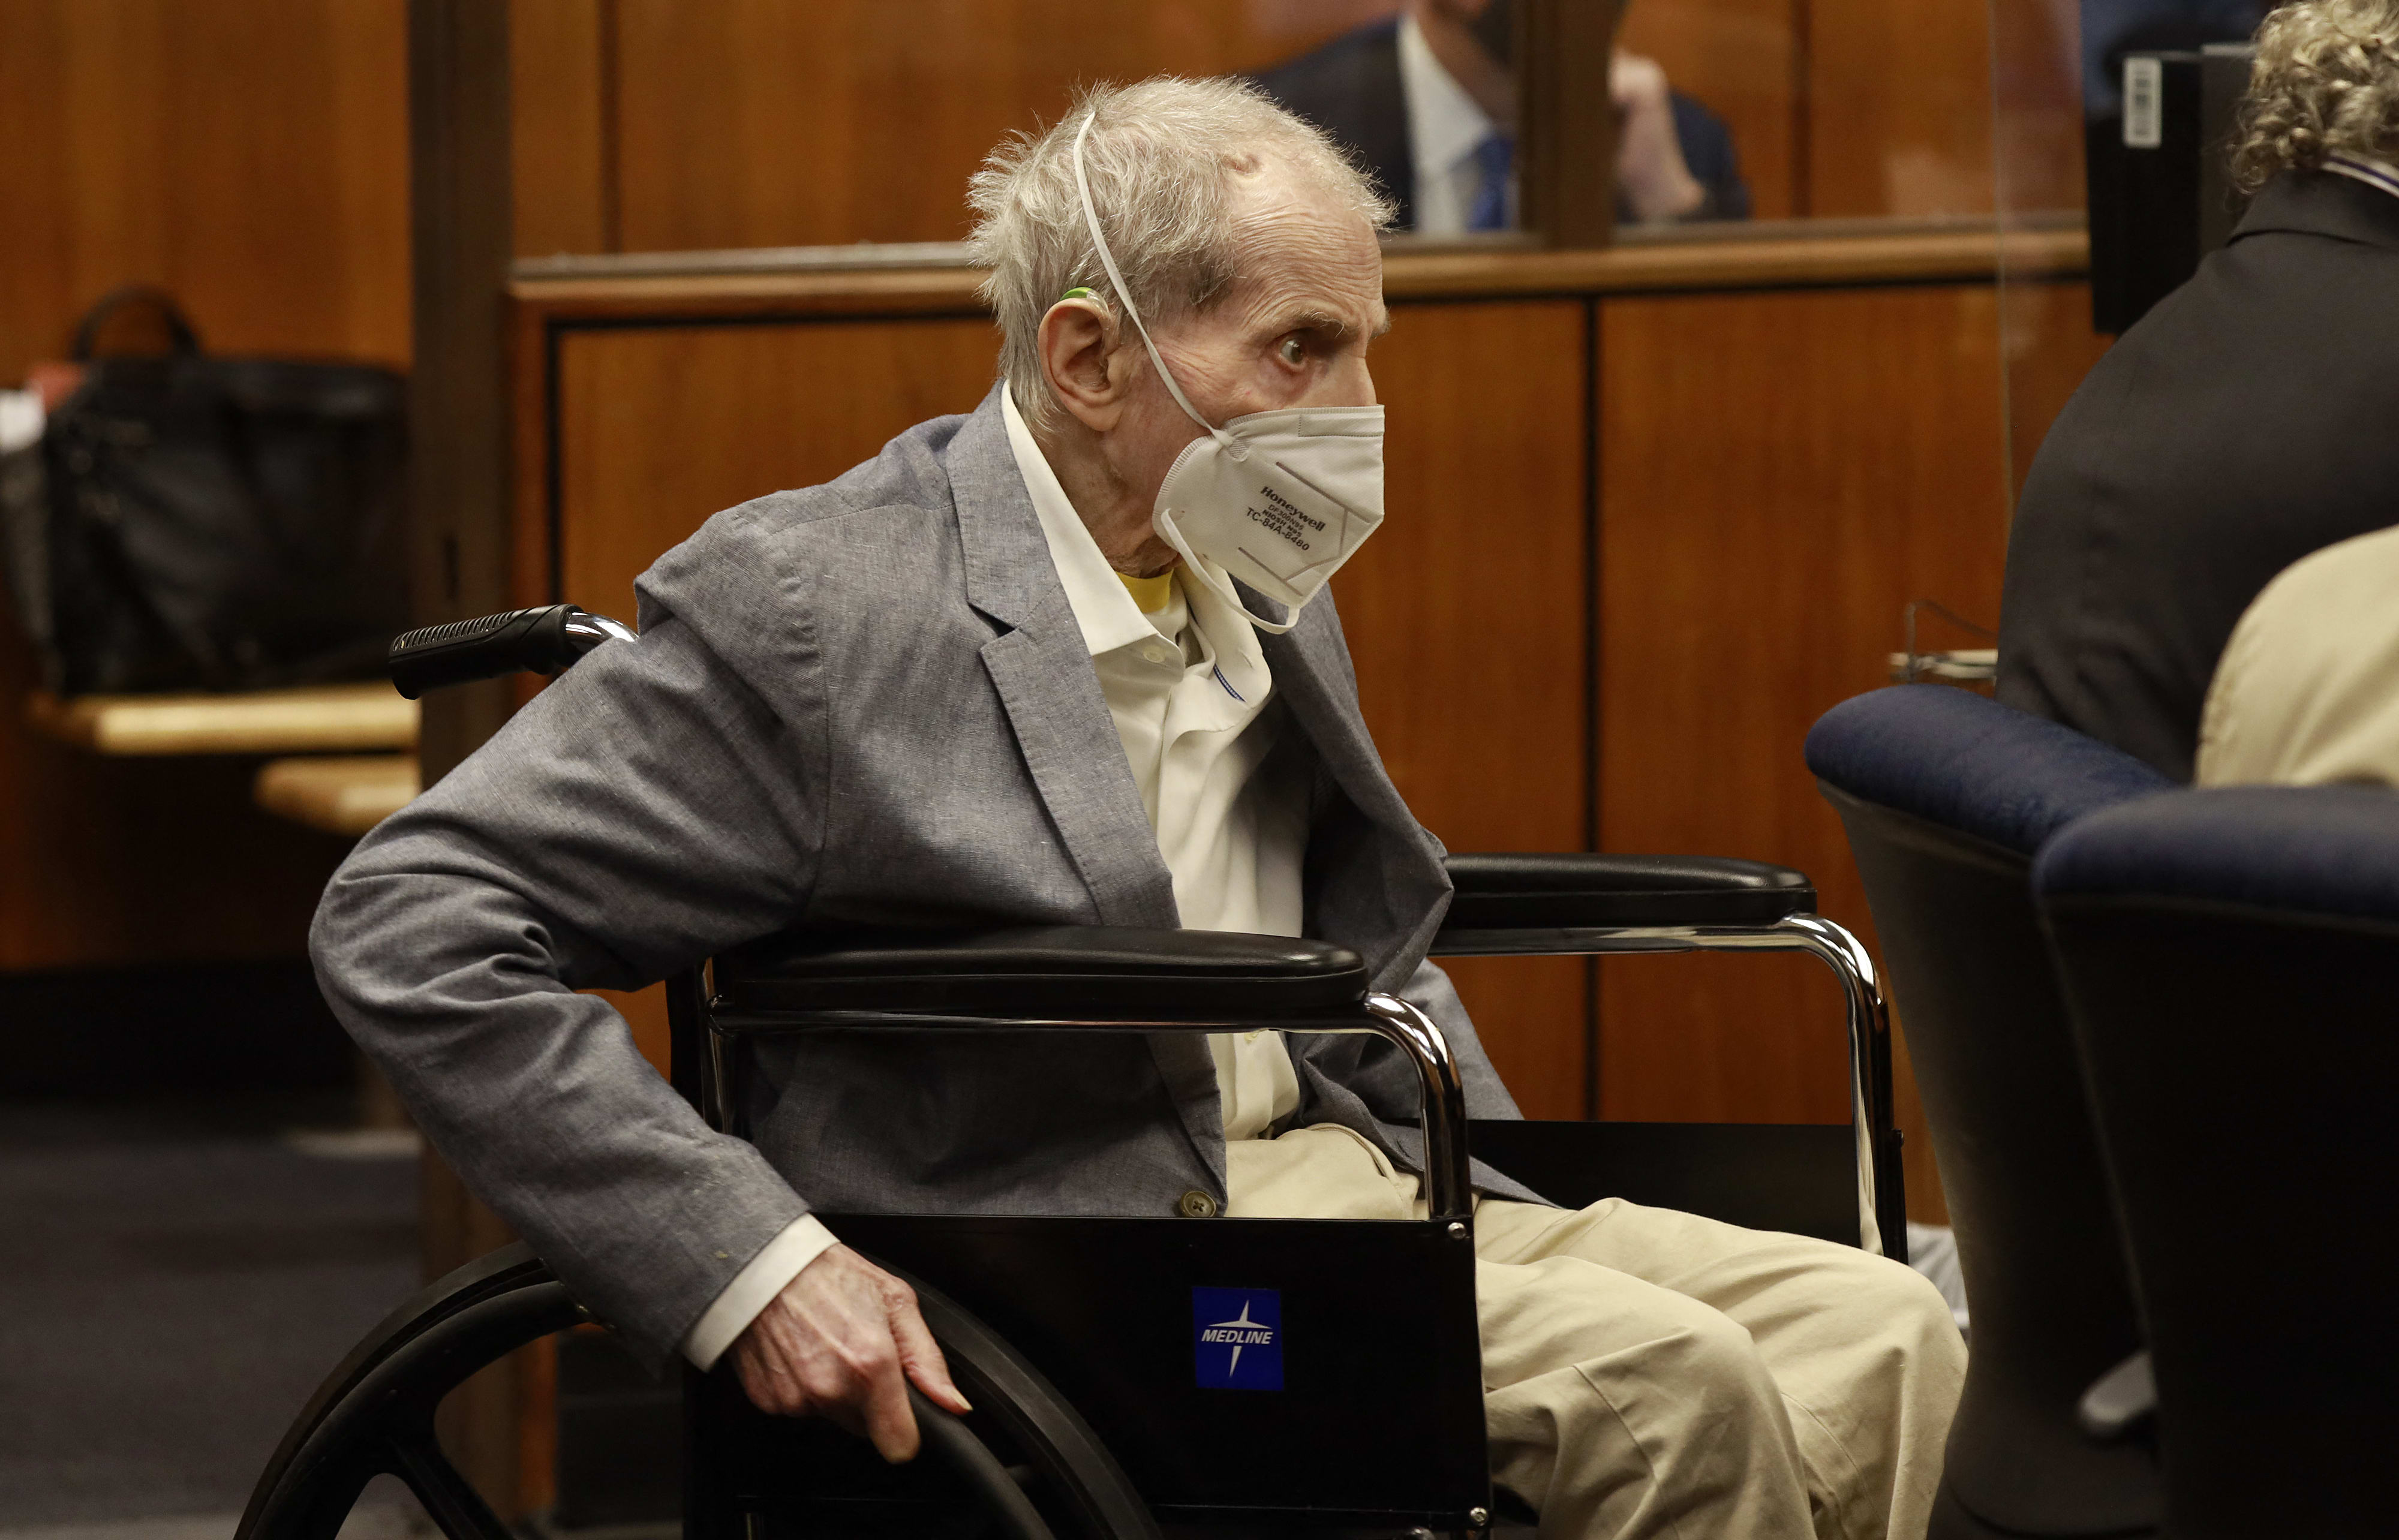 Robert Durst in his wheelchair spins in place as he looks at people in the courtroom.